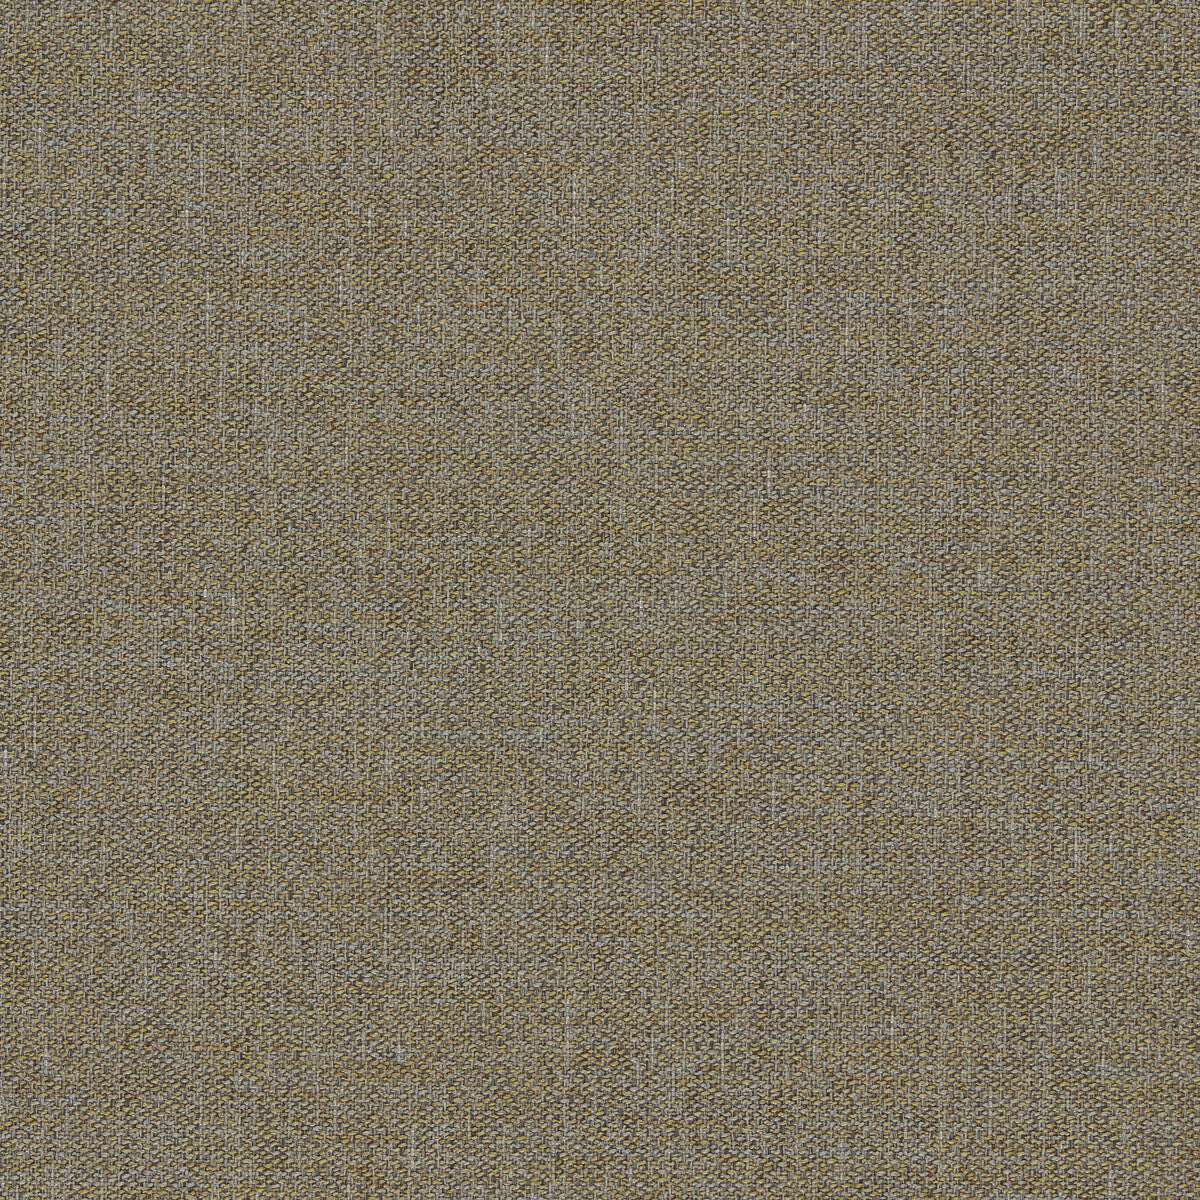 Llanara fabric in antique color - pattern F1422/01.CAC.0 - by Clarke And Clarke in the Clarke &amp; Clarke Purus collection